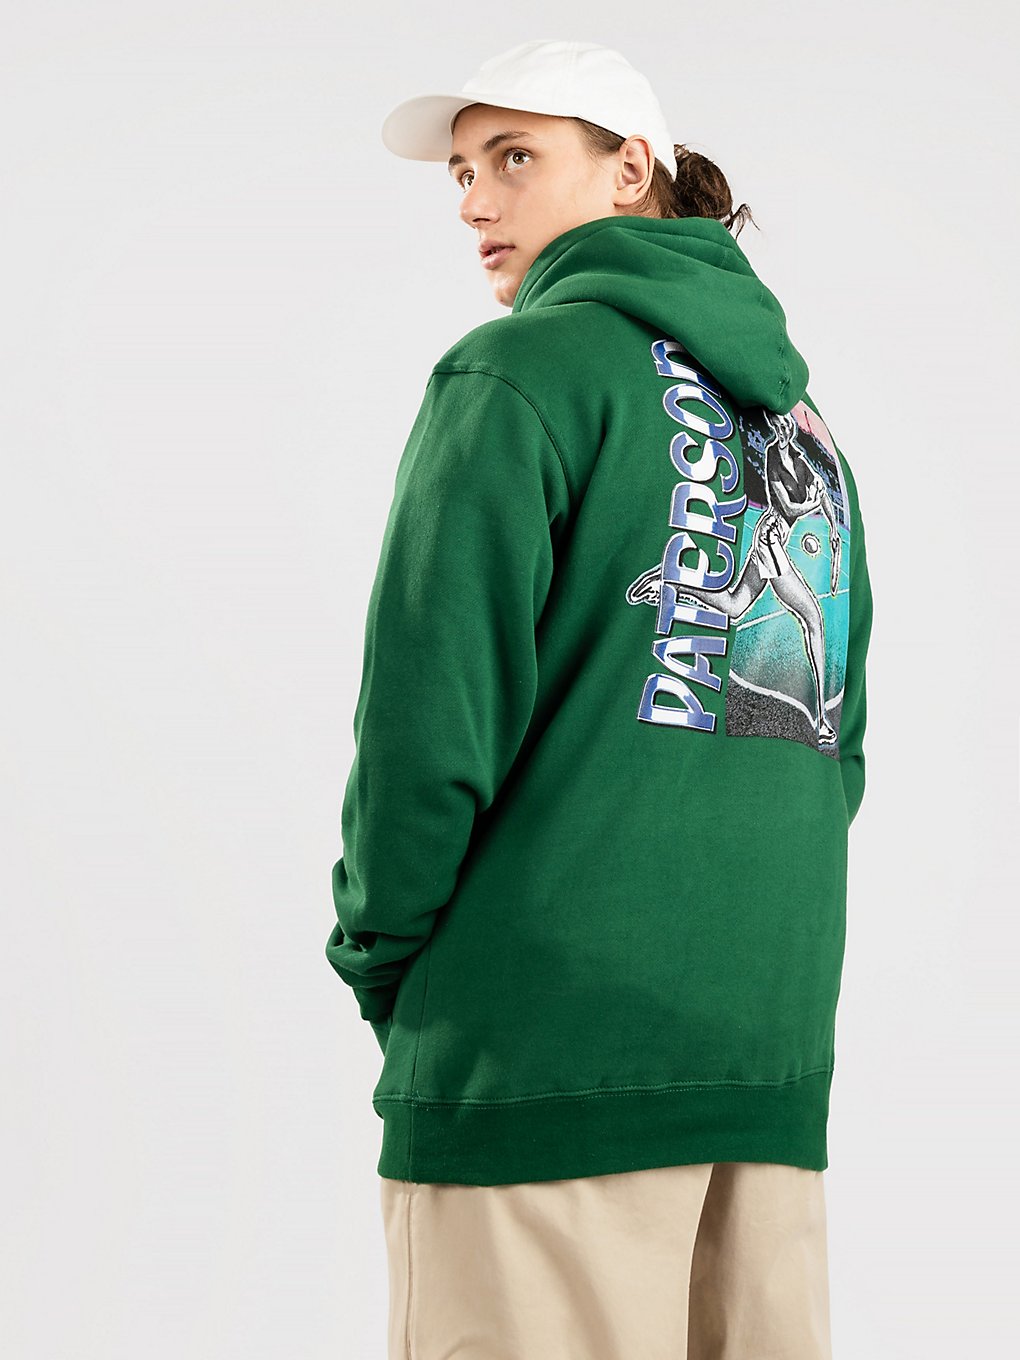 Paterson Cross The Line Hoodie green kaufen